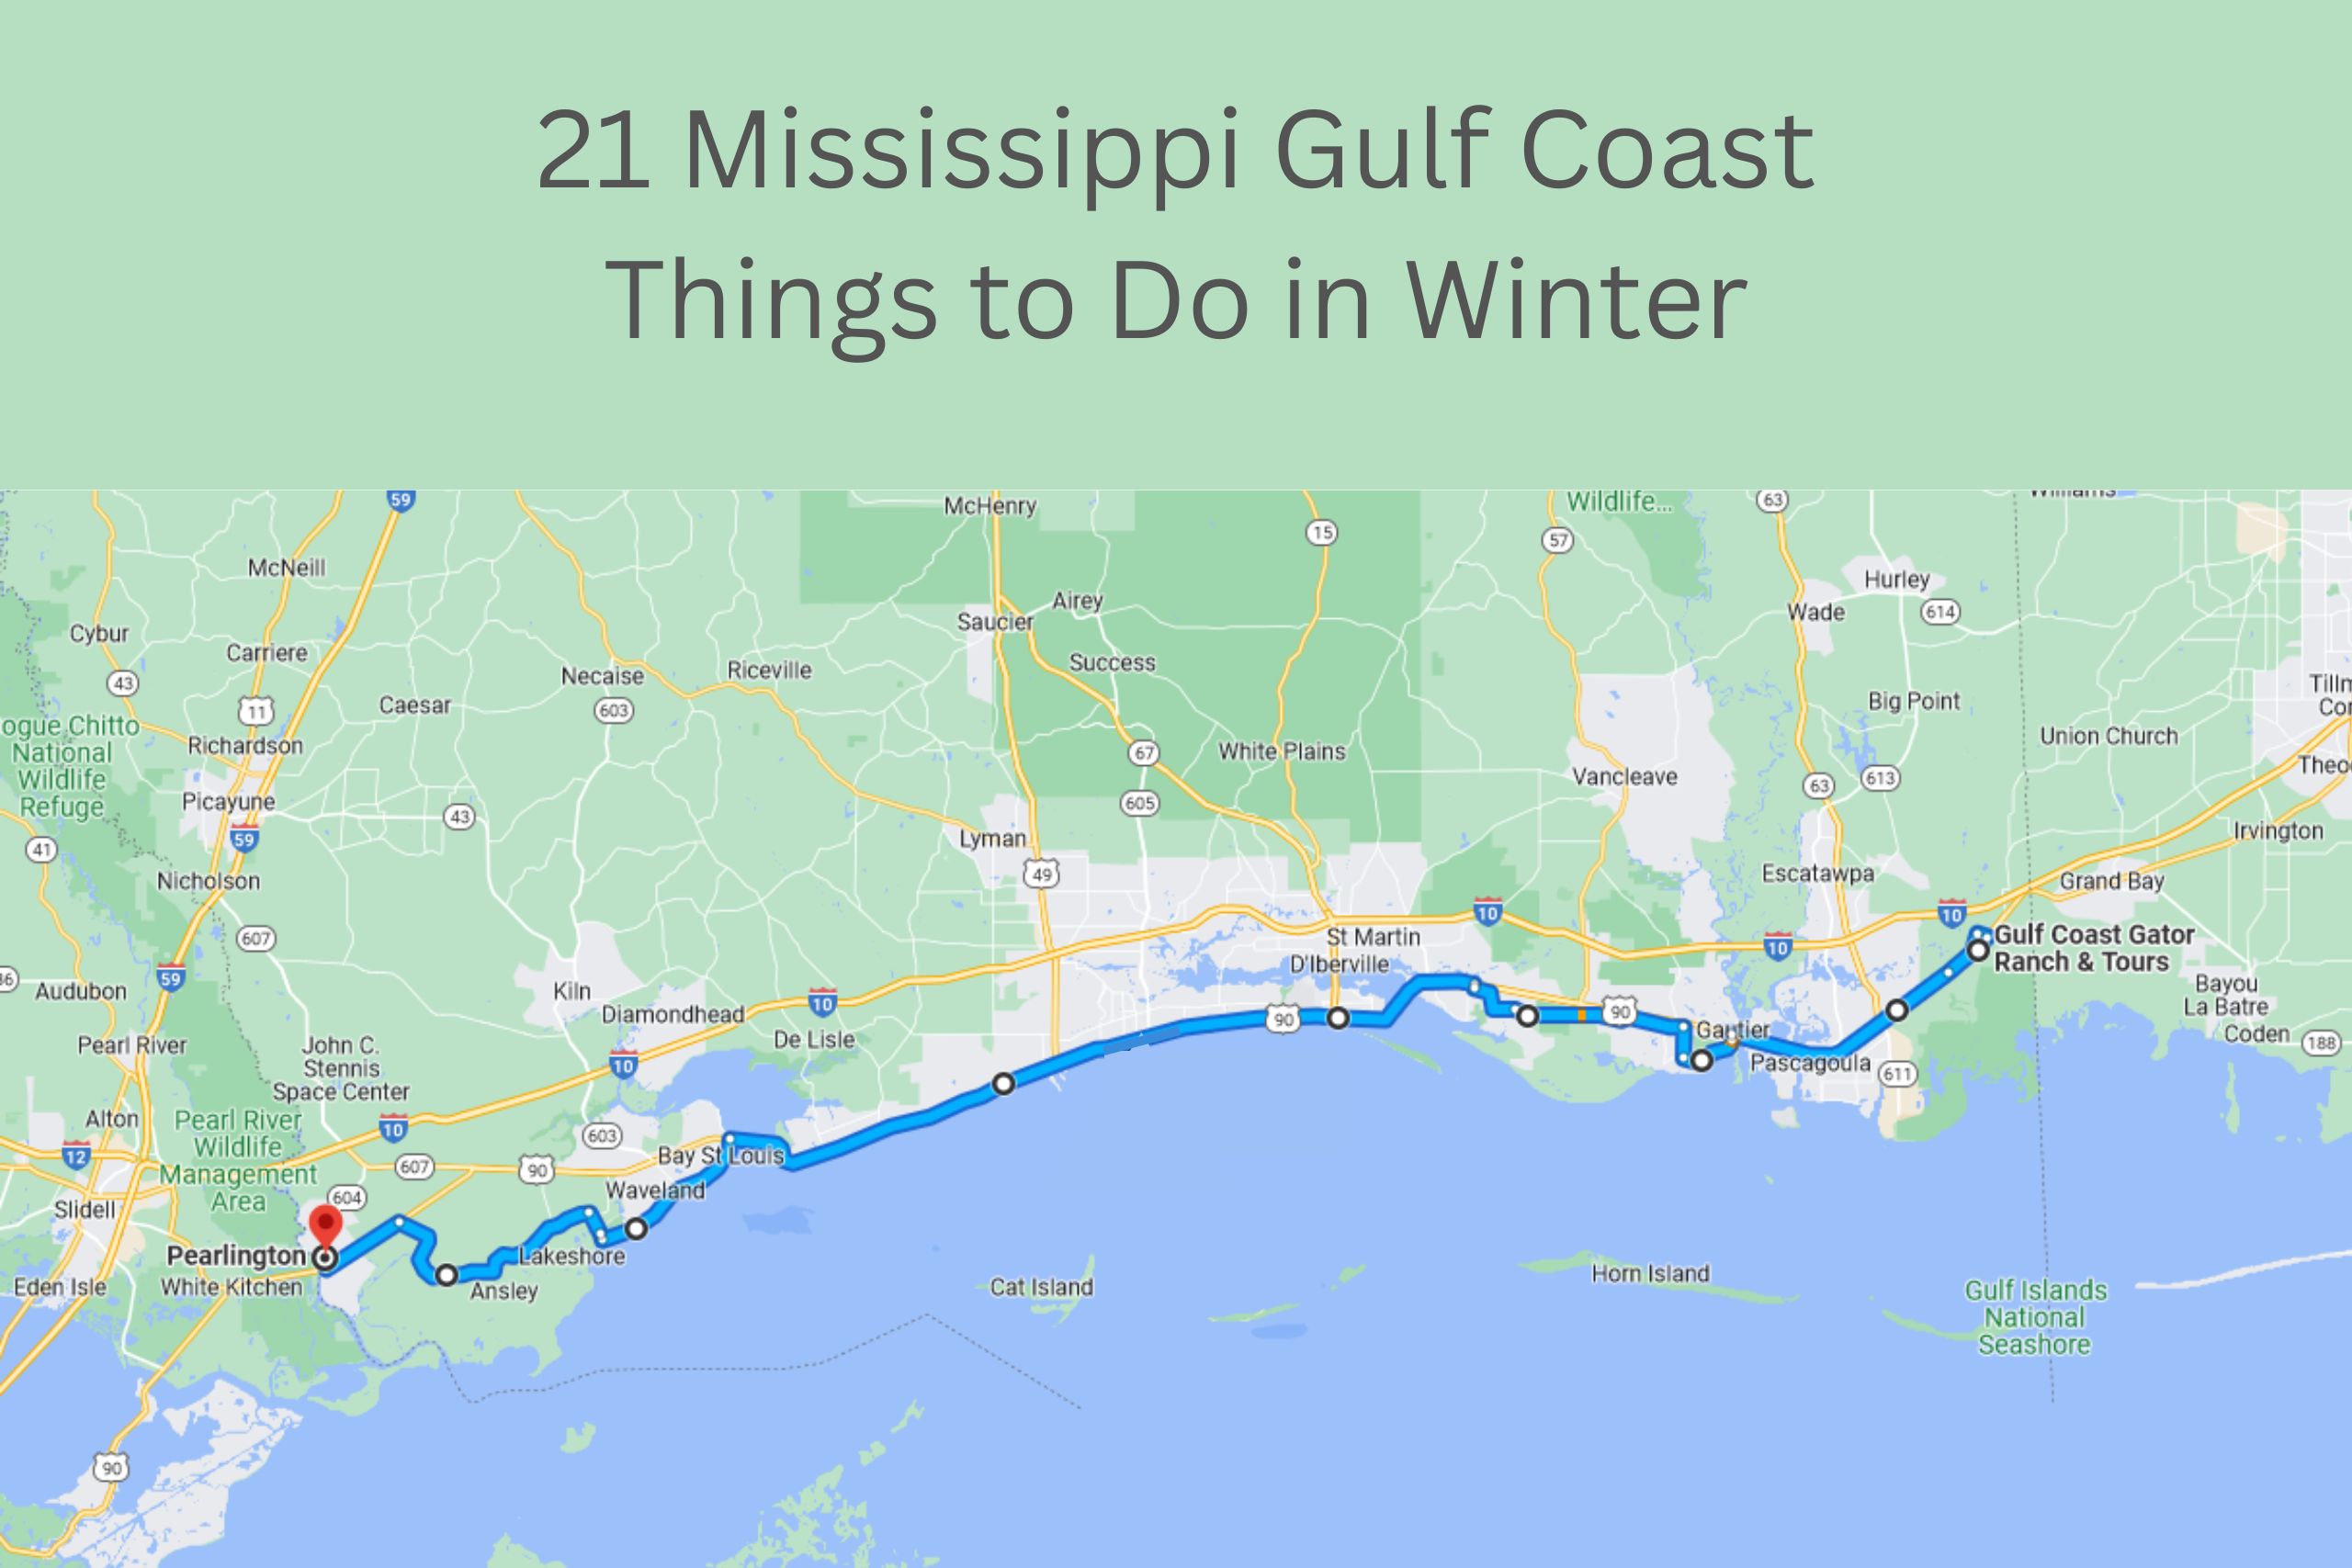 21 Mississippi Gulf Coast Things to Do in Winter